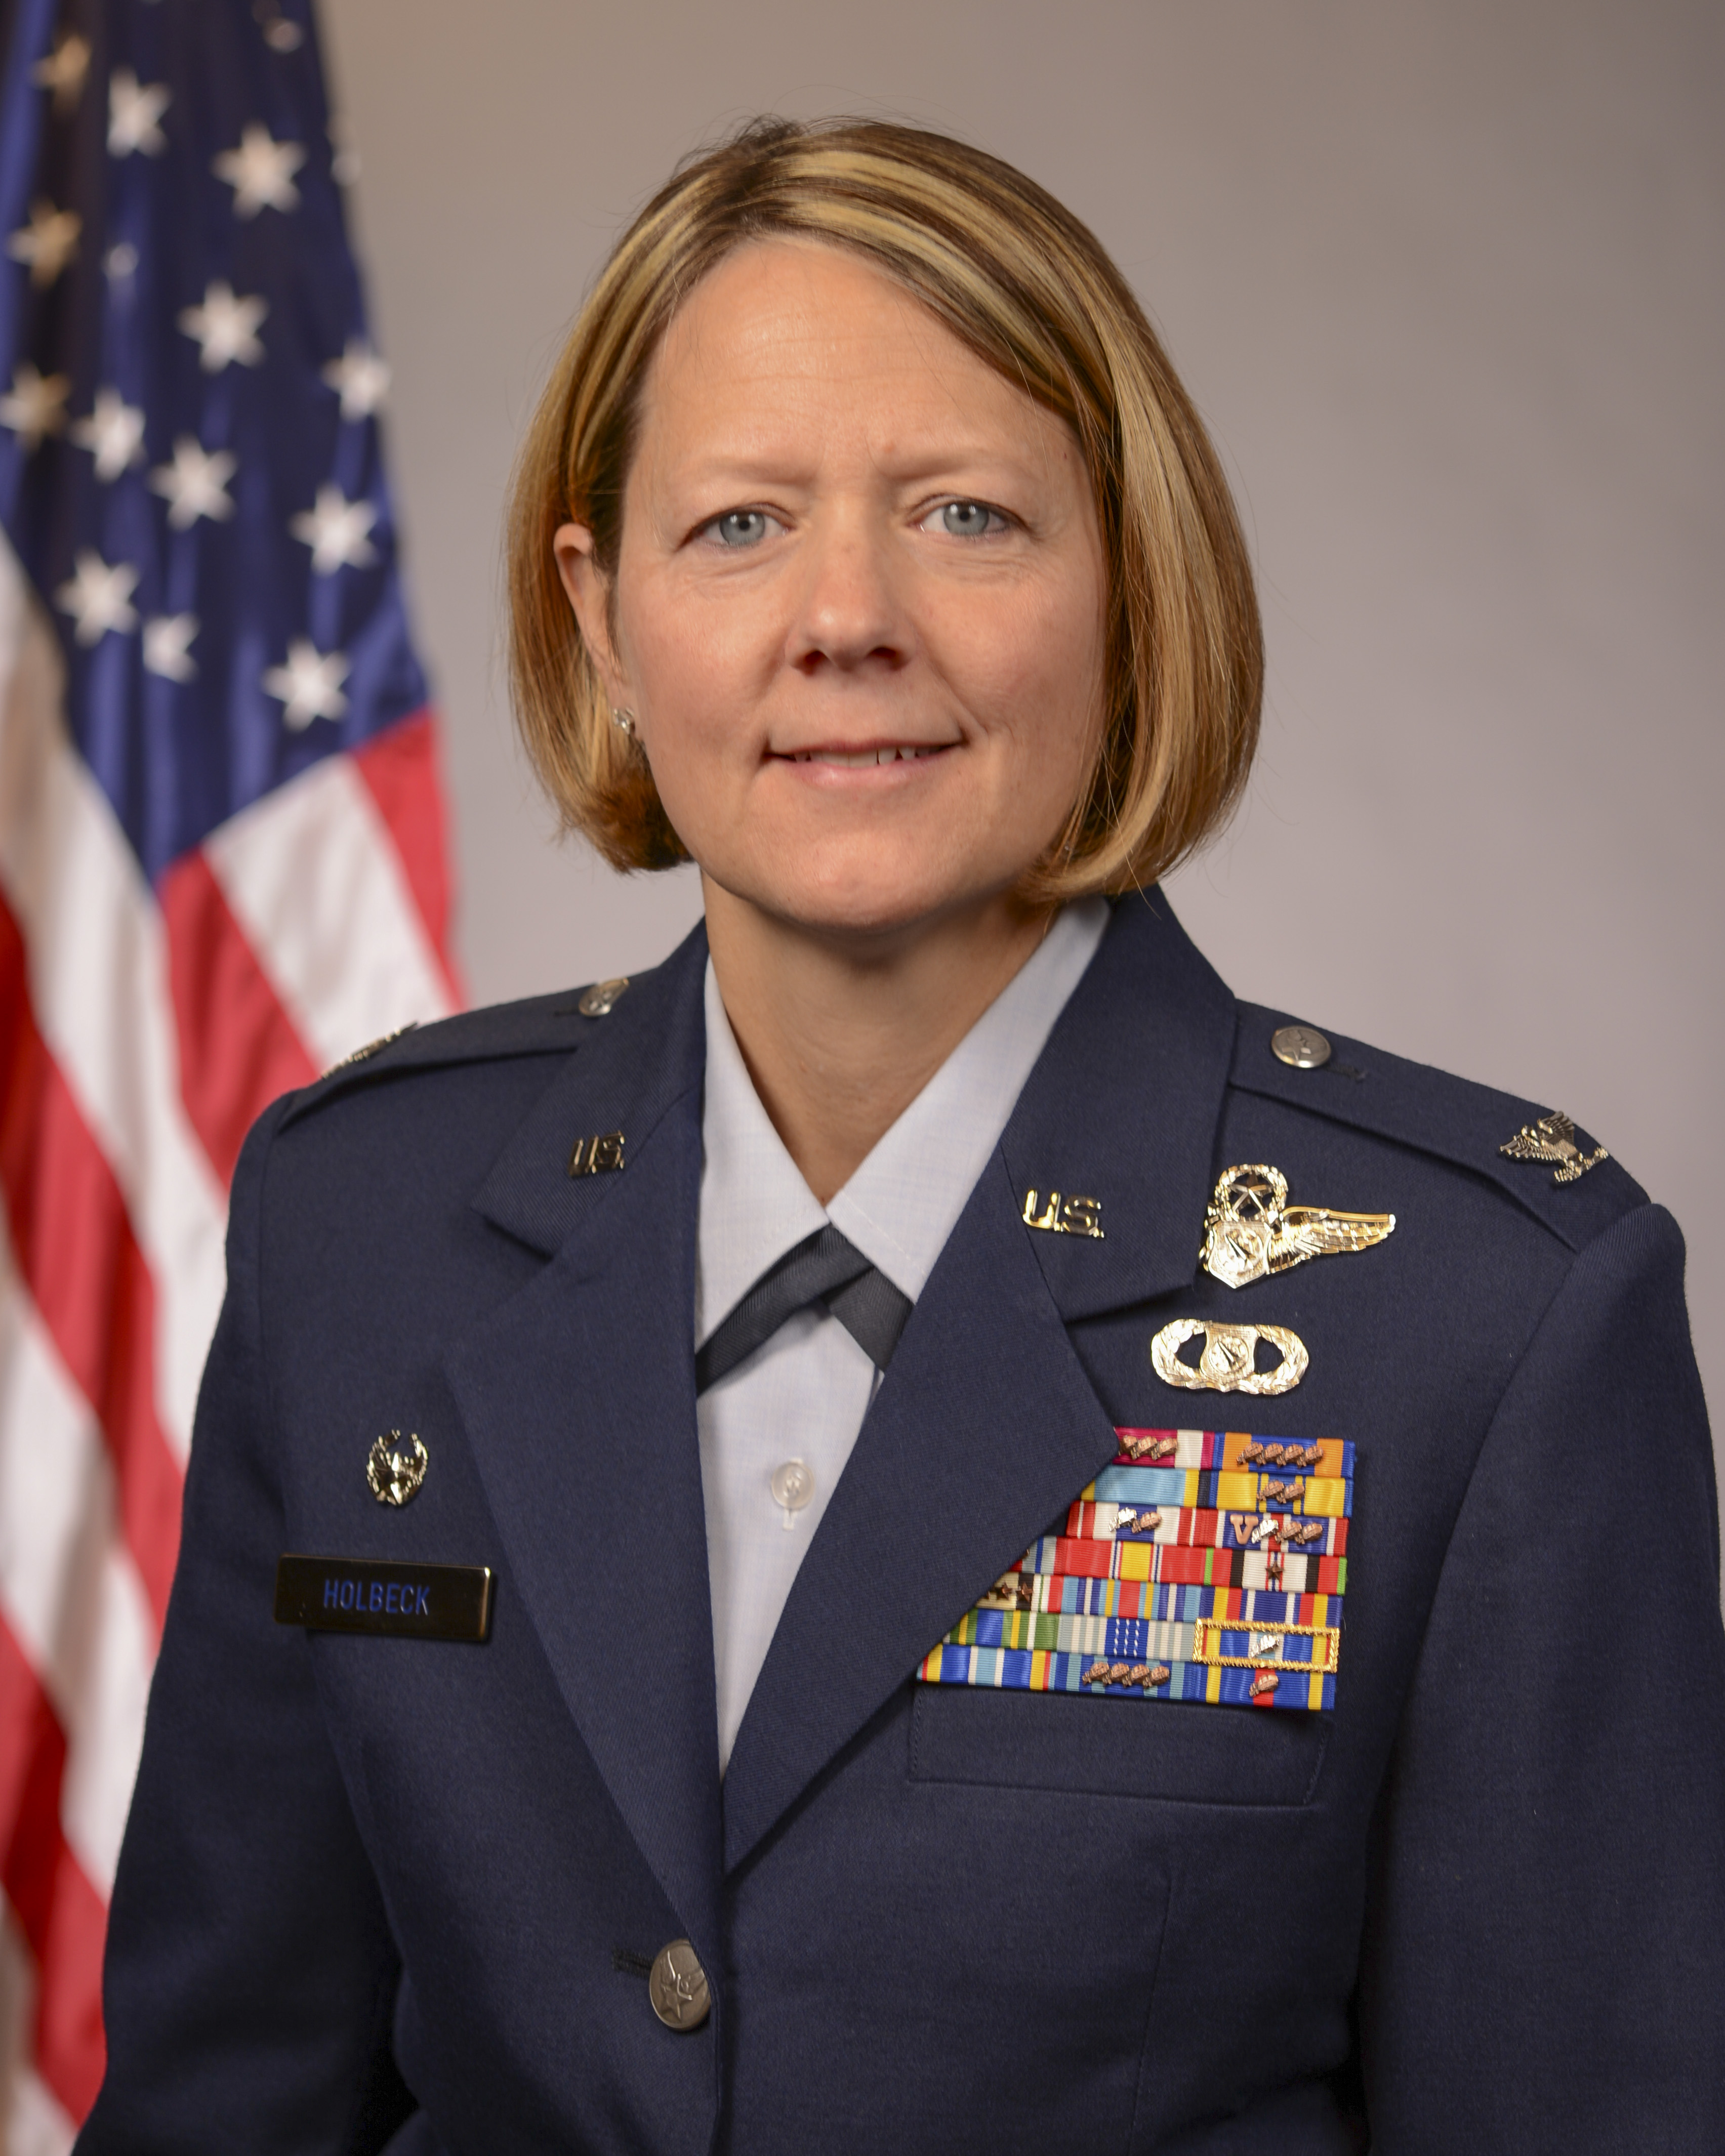 Col. Amy Holbcek, Commander, 116th Air Control Wing